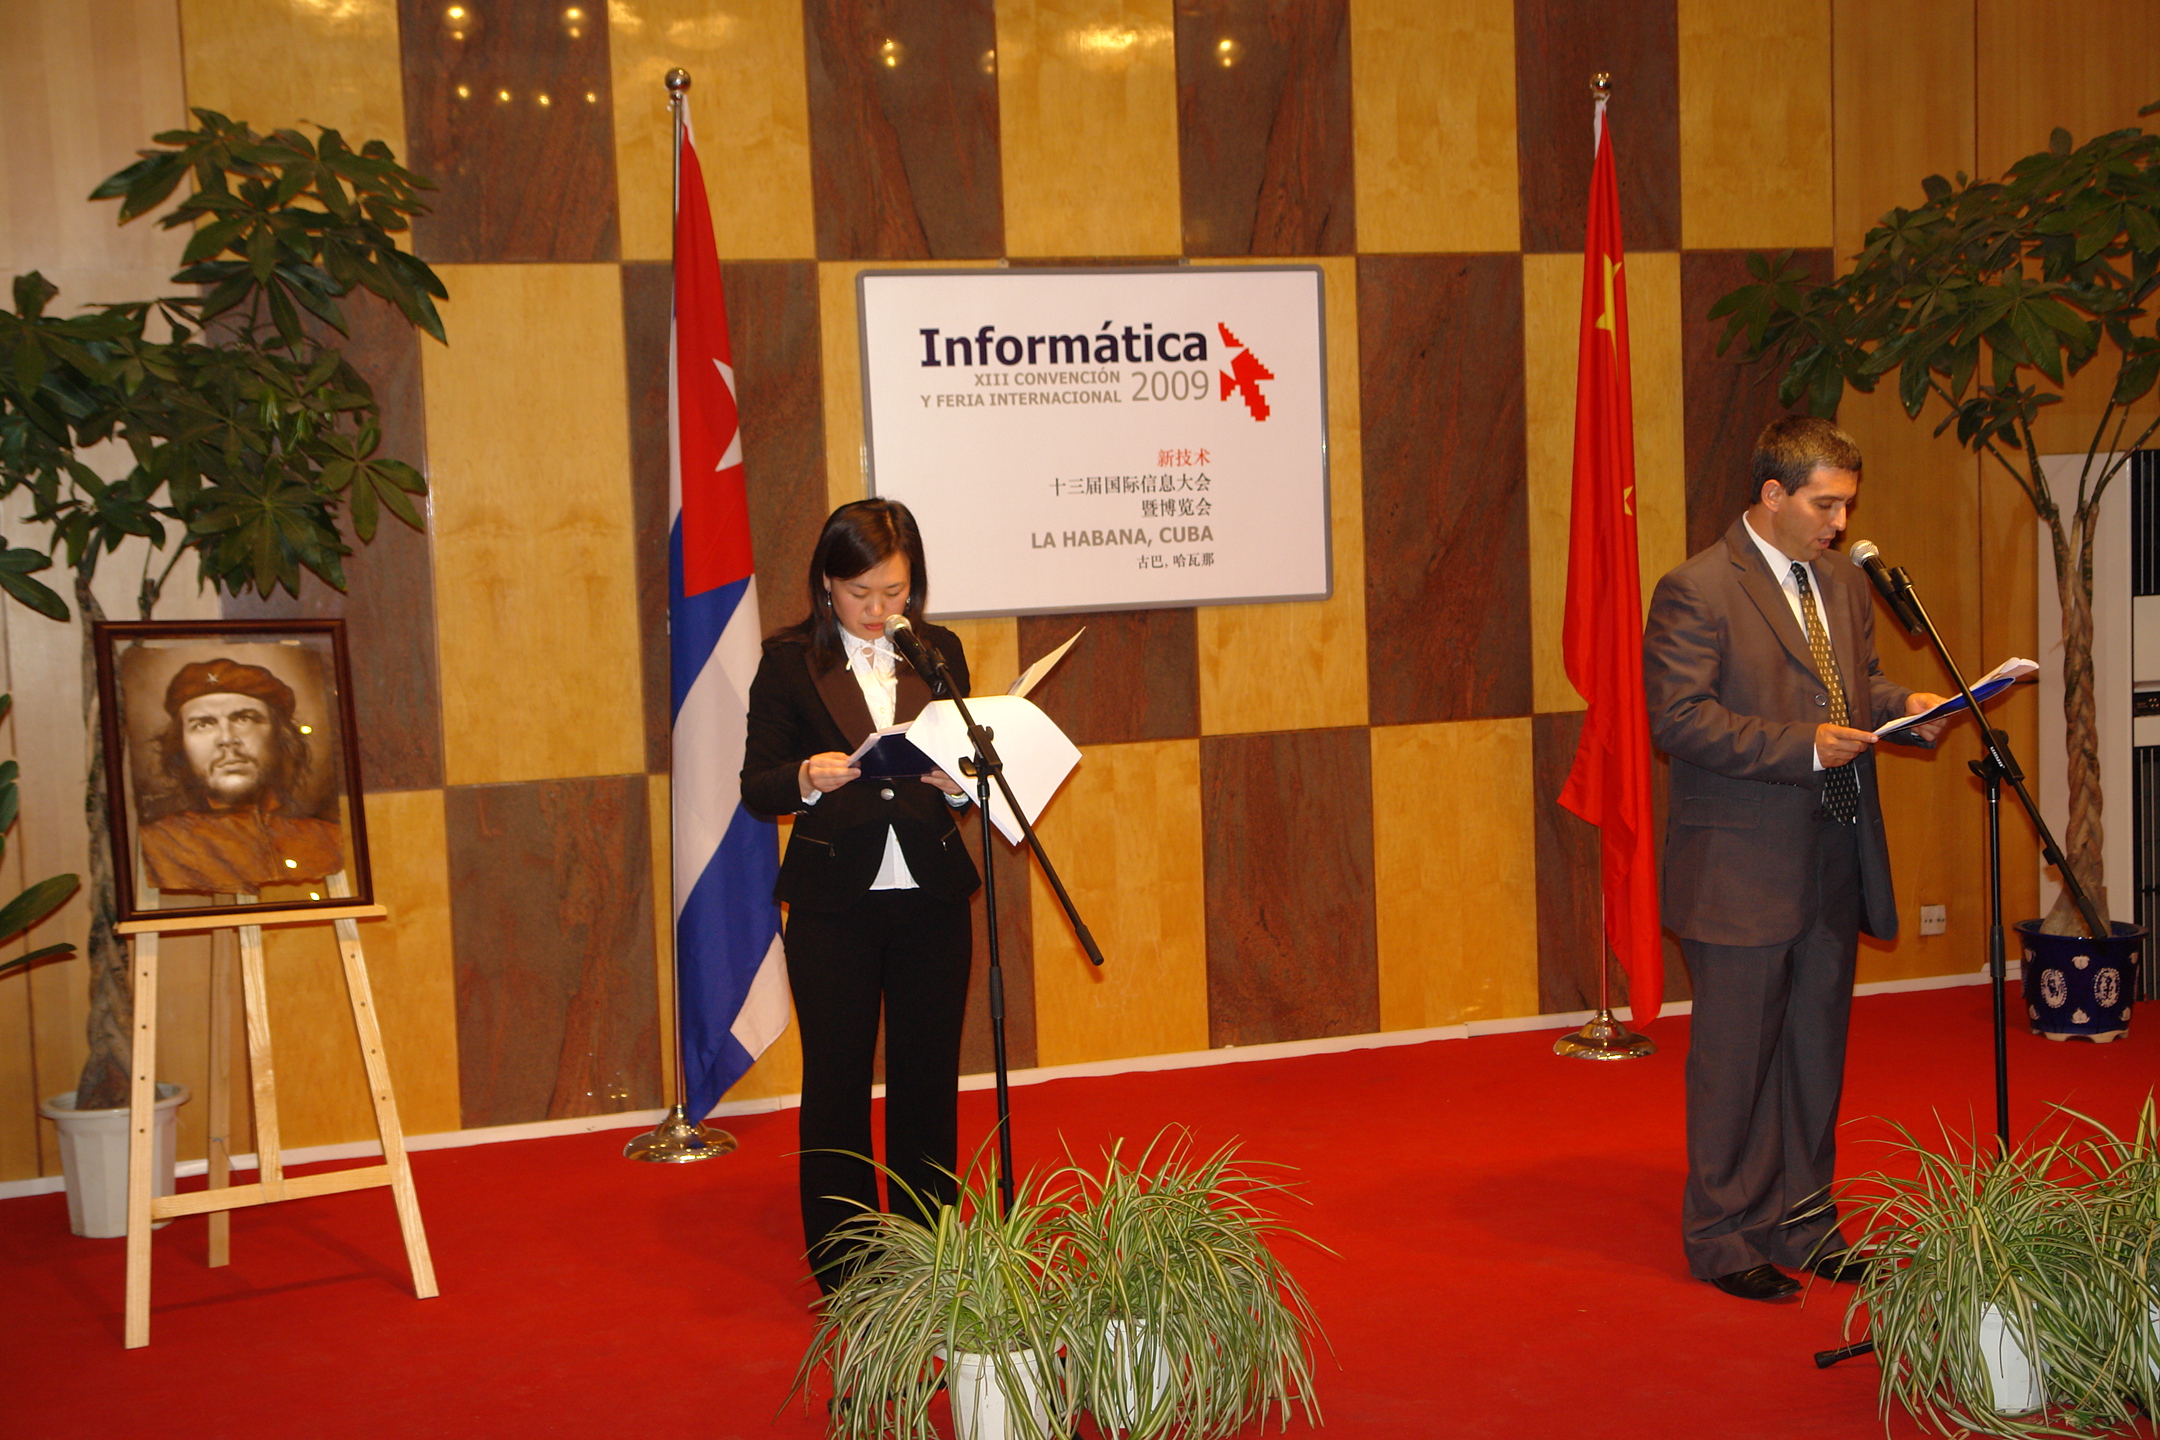 2009-Launch in China of INFORMATICA 2019 by the President of its Organizing Committee, current Deputy Prime Minister of Cuba, Jorge Luis Perdomo